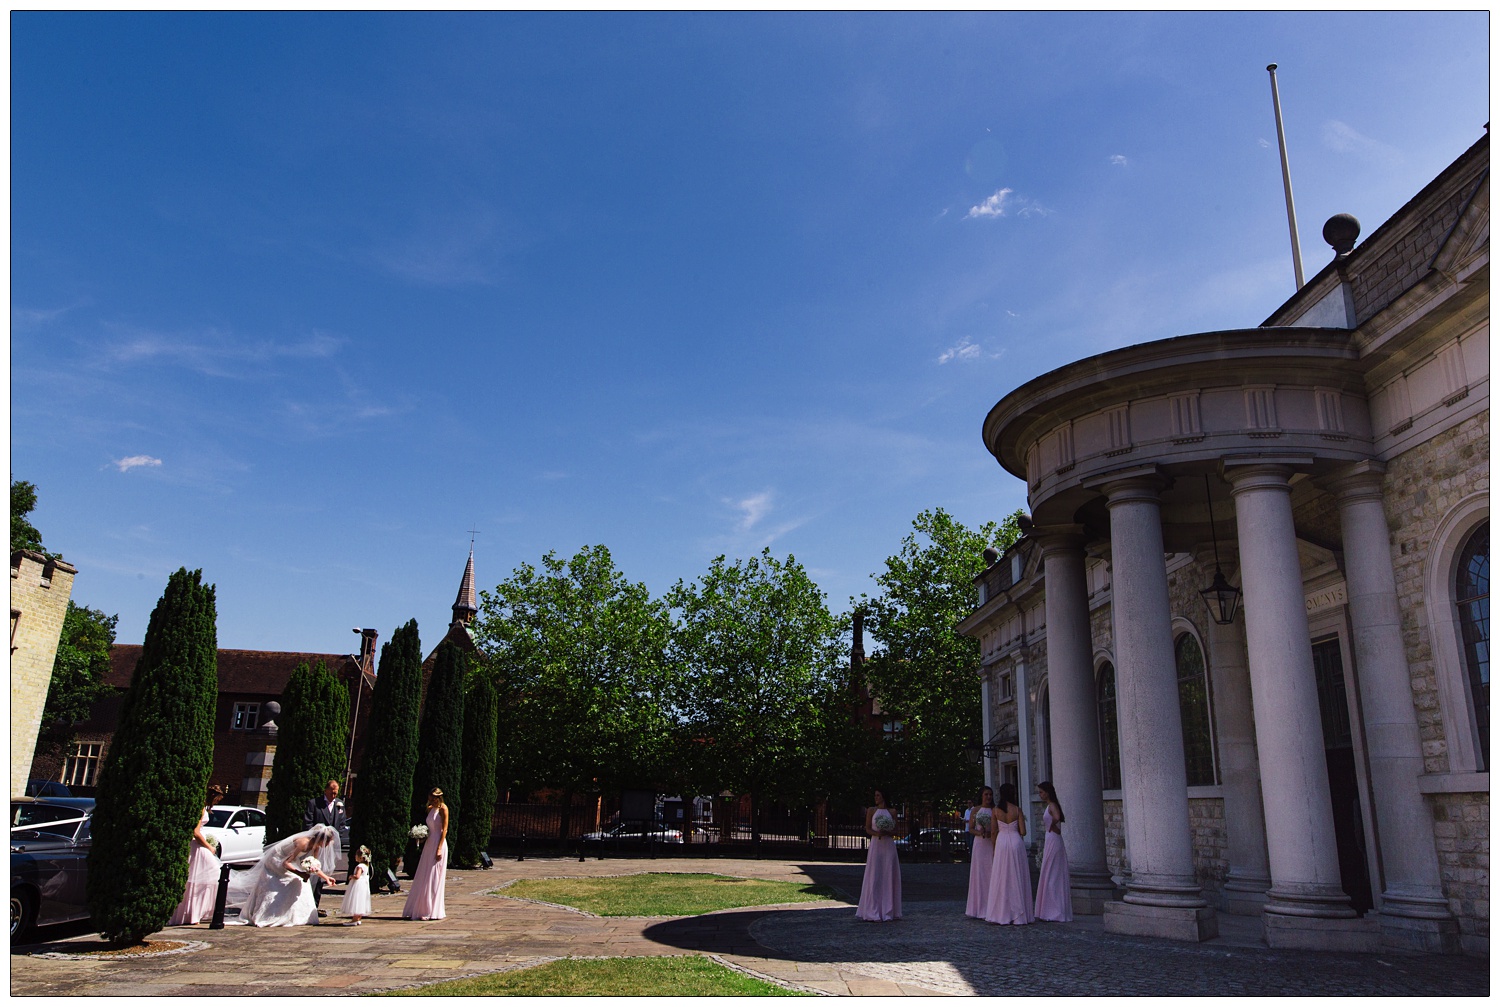 A view of the bride and bridesmaids arriving at Brentwood Cathedral. The sky is blue.